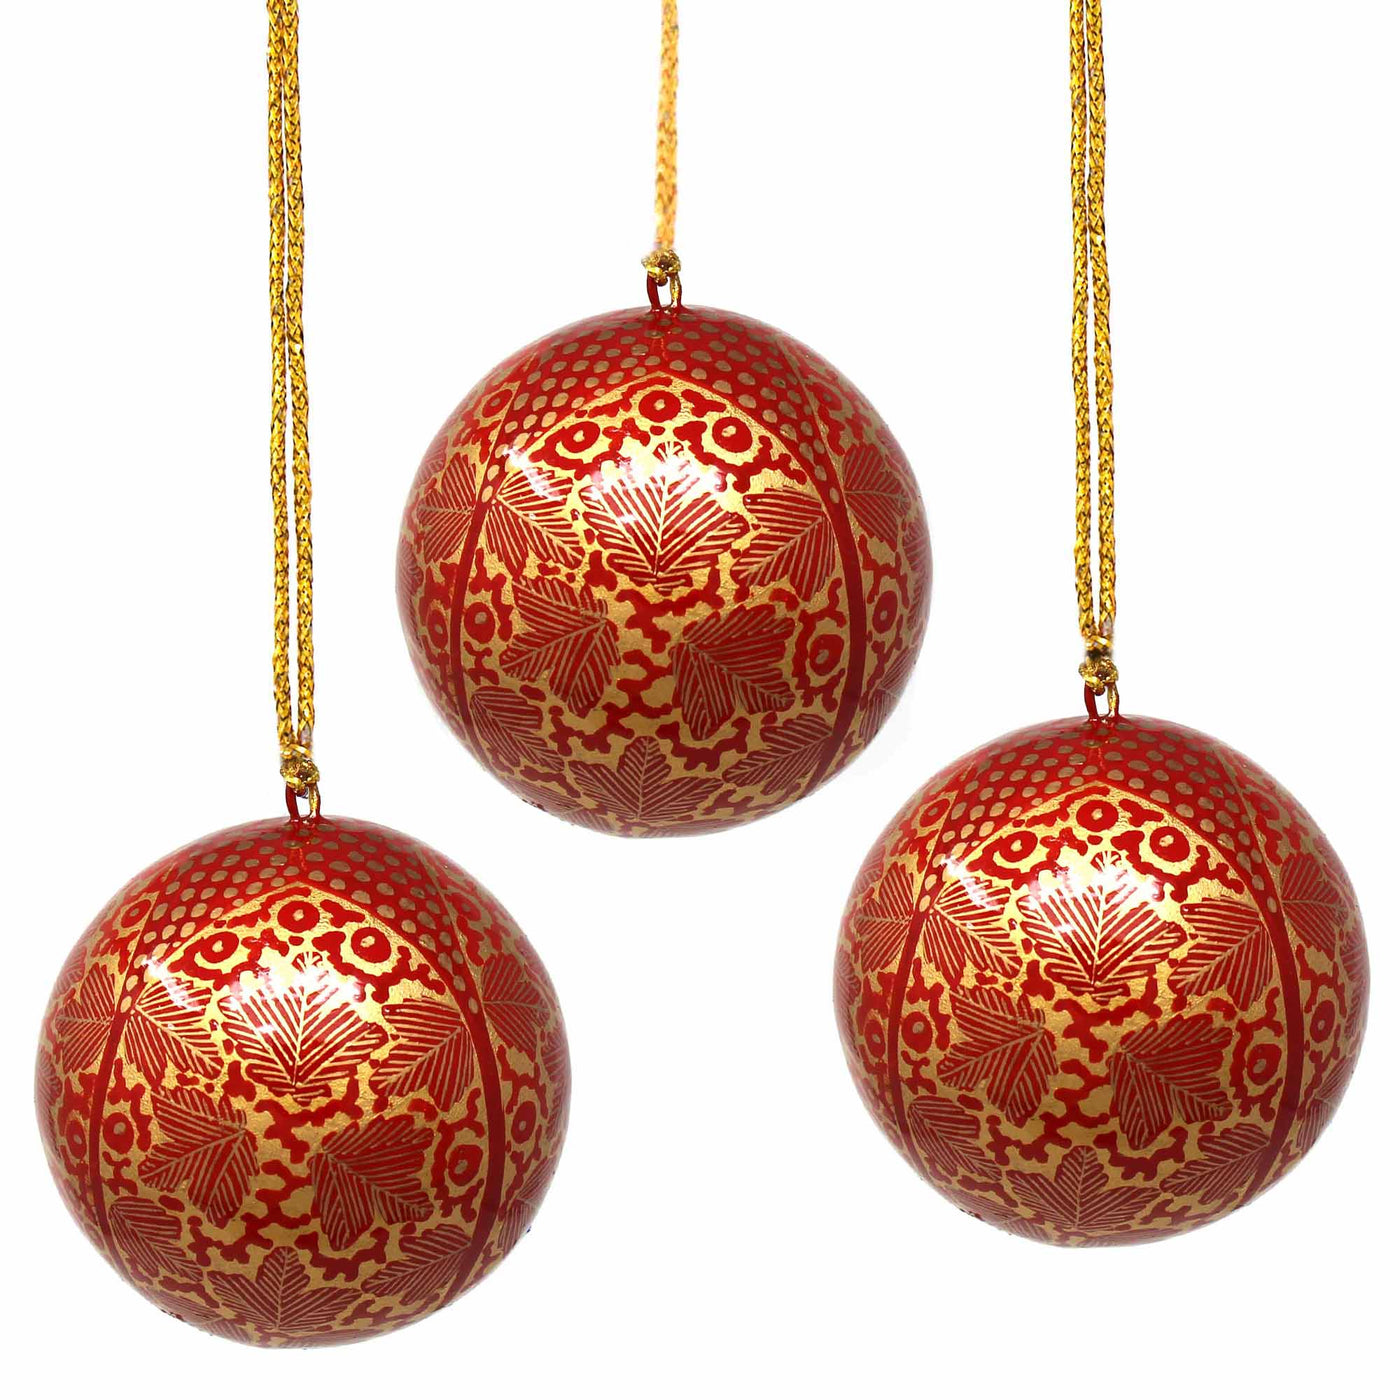 Handpainted Ornaments, Gold Chinar Leaves - Pack of 3 - Yvonne’s 100th Wish Inc